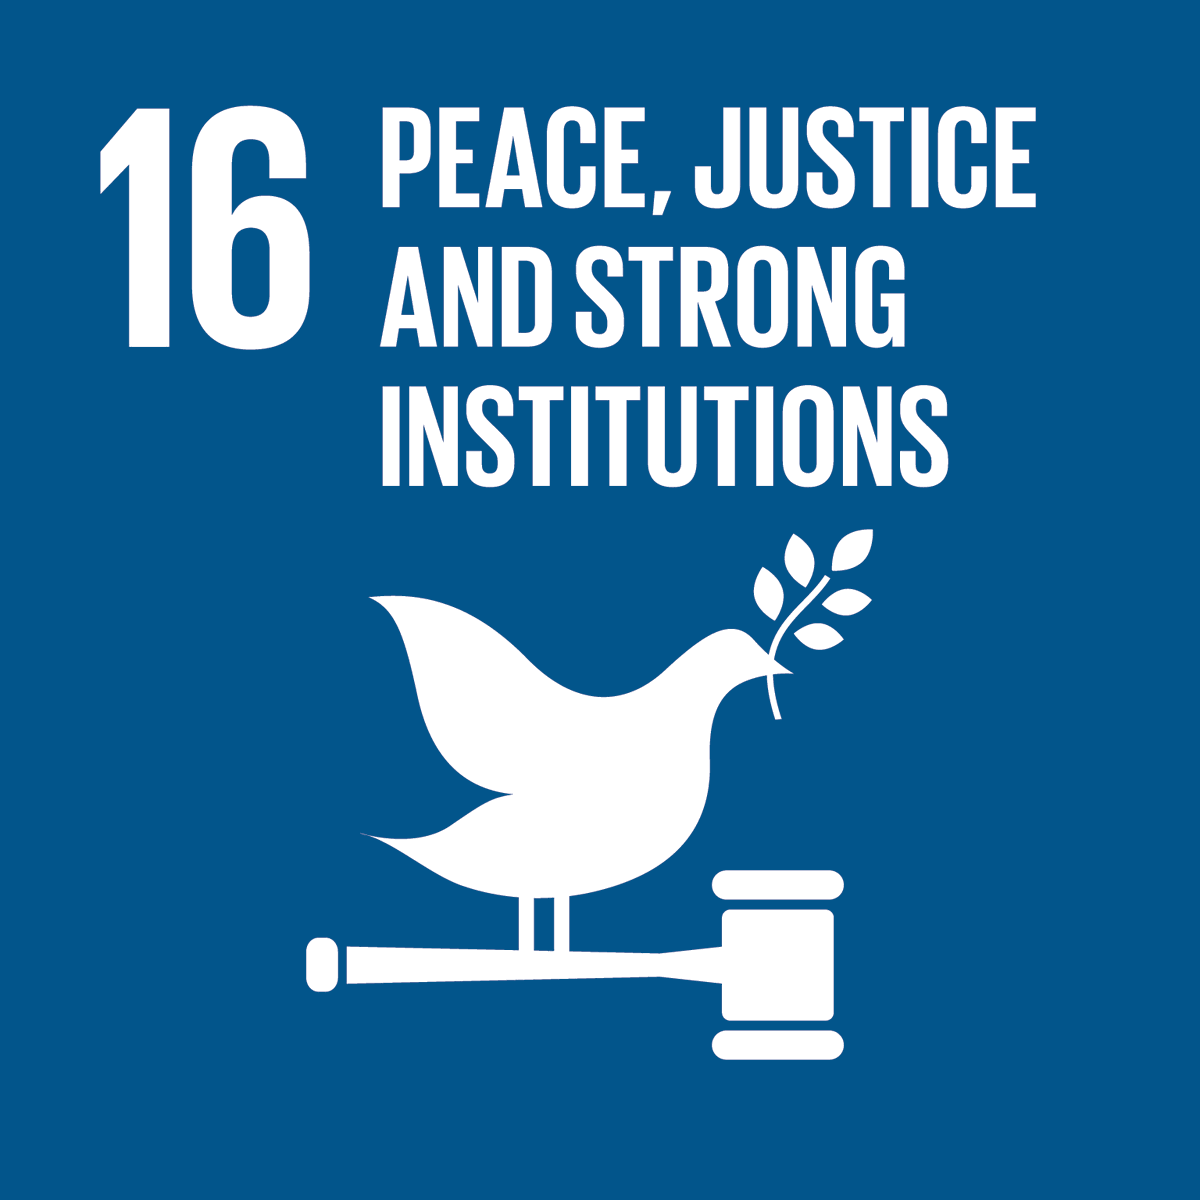 #PositivePeace is a key component of sustainable development. It creates the enabling environment for the societies that flourish 🕊️, contributing to the economic and social well-being and the peacefulness of our societies over the long term.